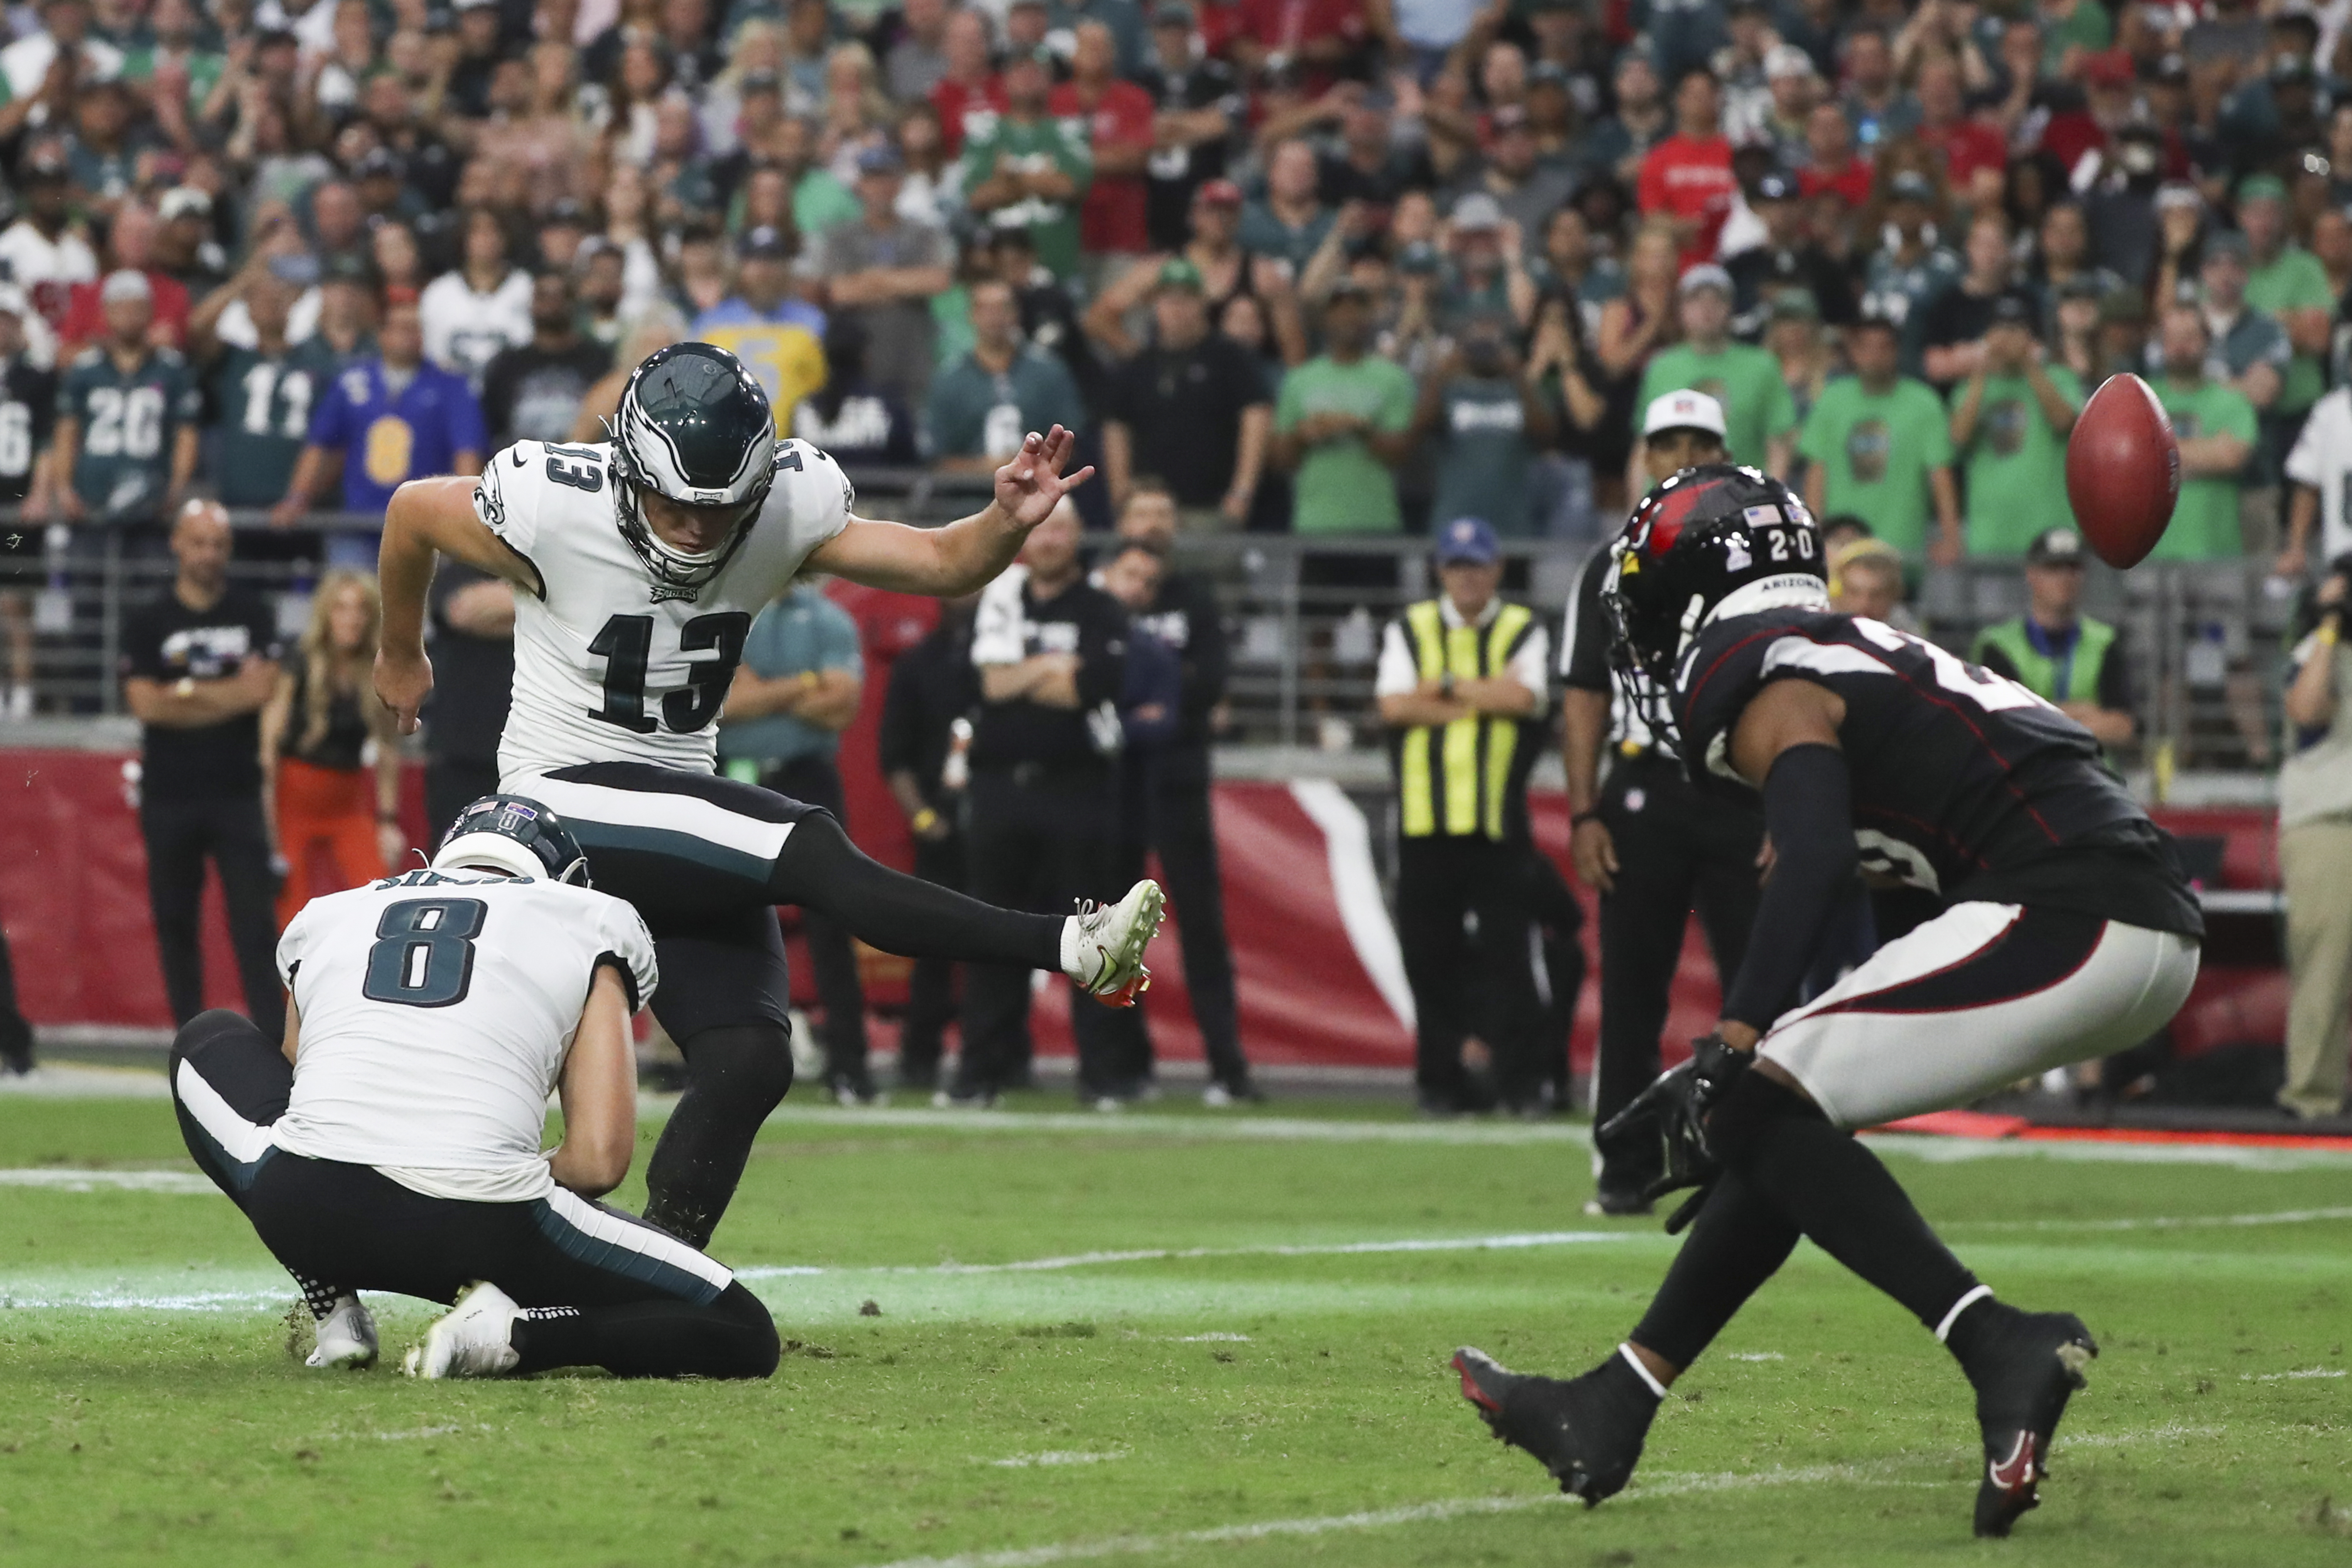 Cameron 'Dicker the Kicker' boots the Eagles past the Cardinals